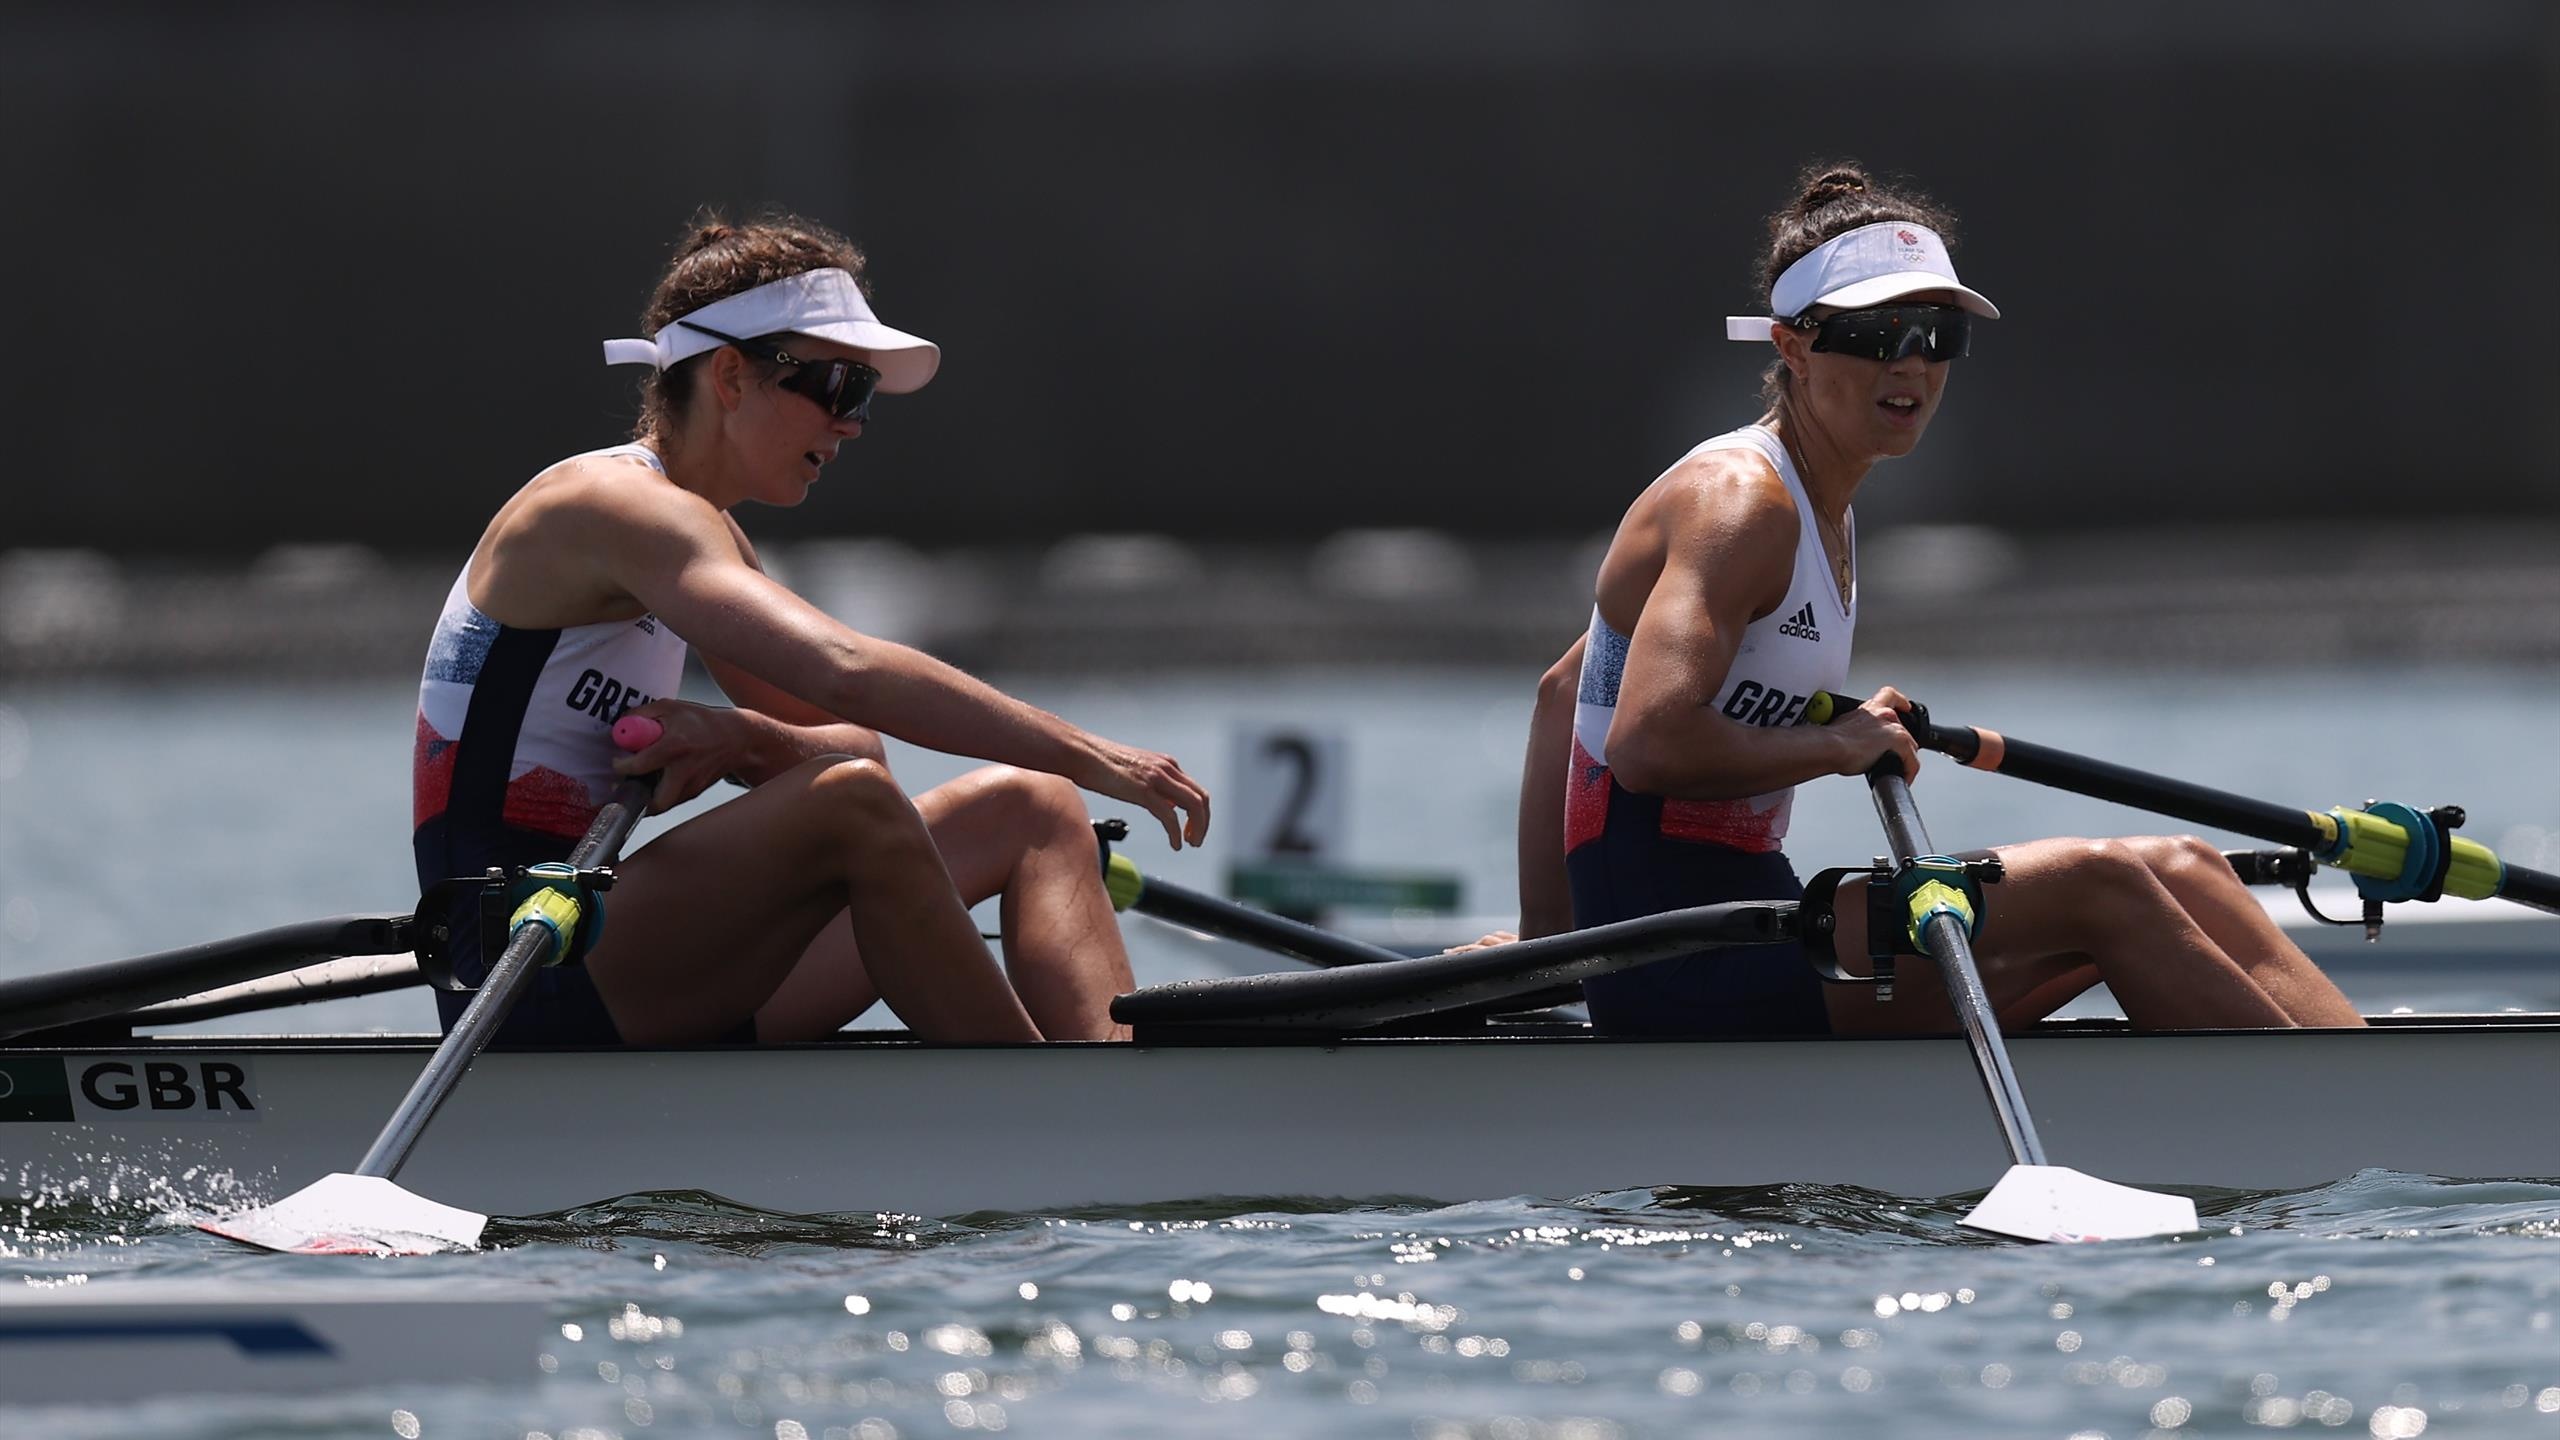 Rowing: Emily Craig and Imogen Grant of Team GB at the Tokyo 2020 Summer Olympics. 2560x1440 HD Wallpaper.